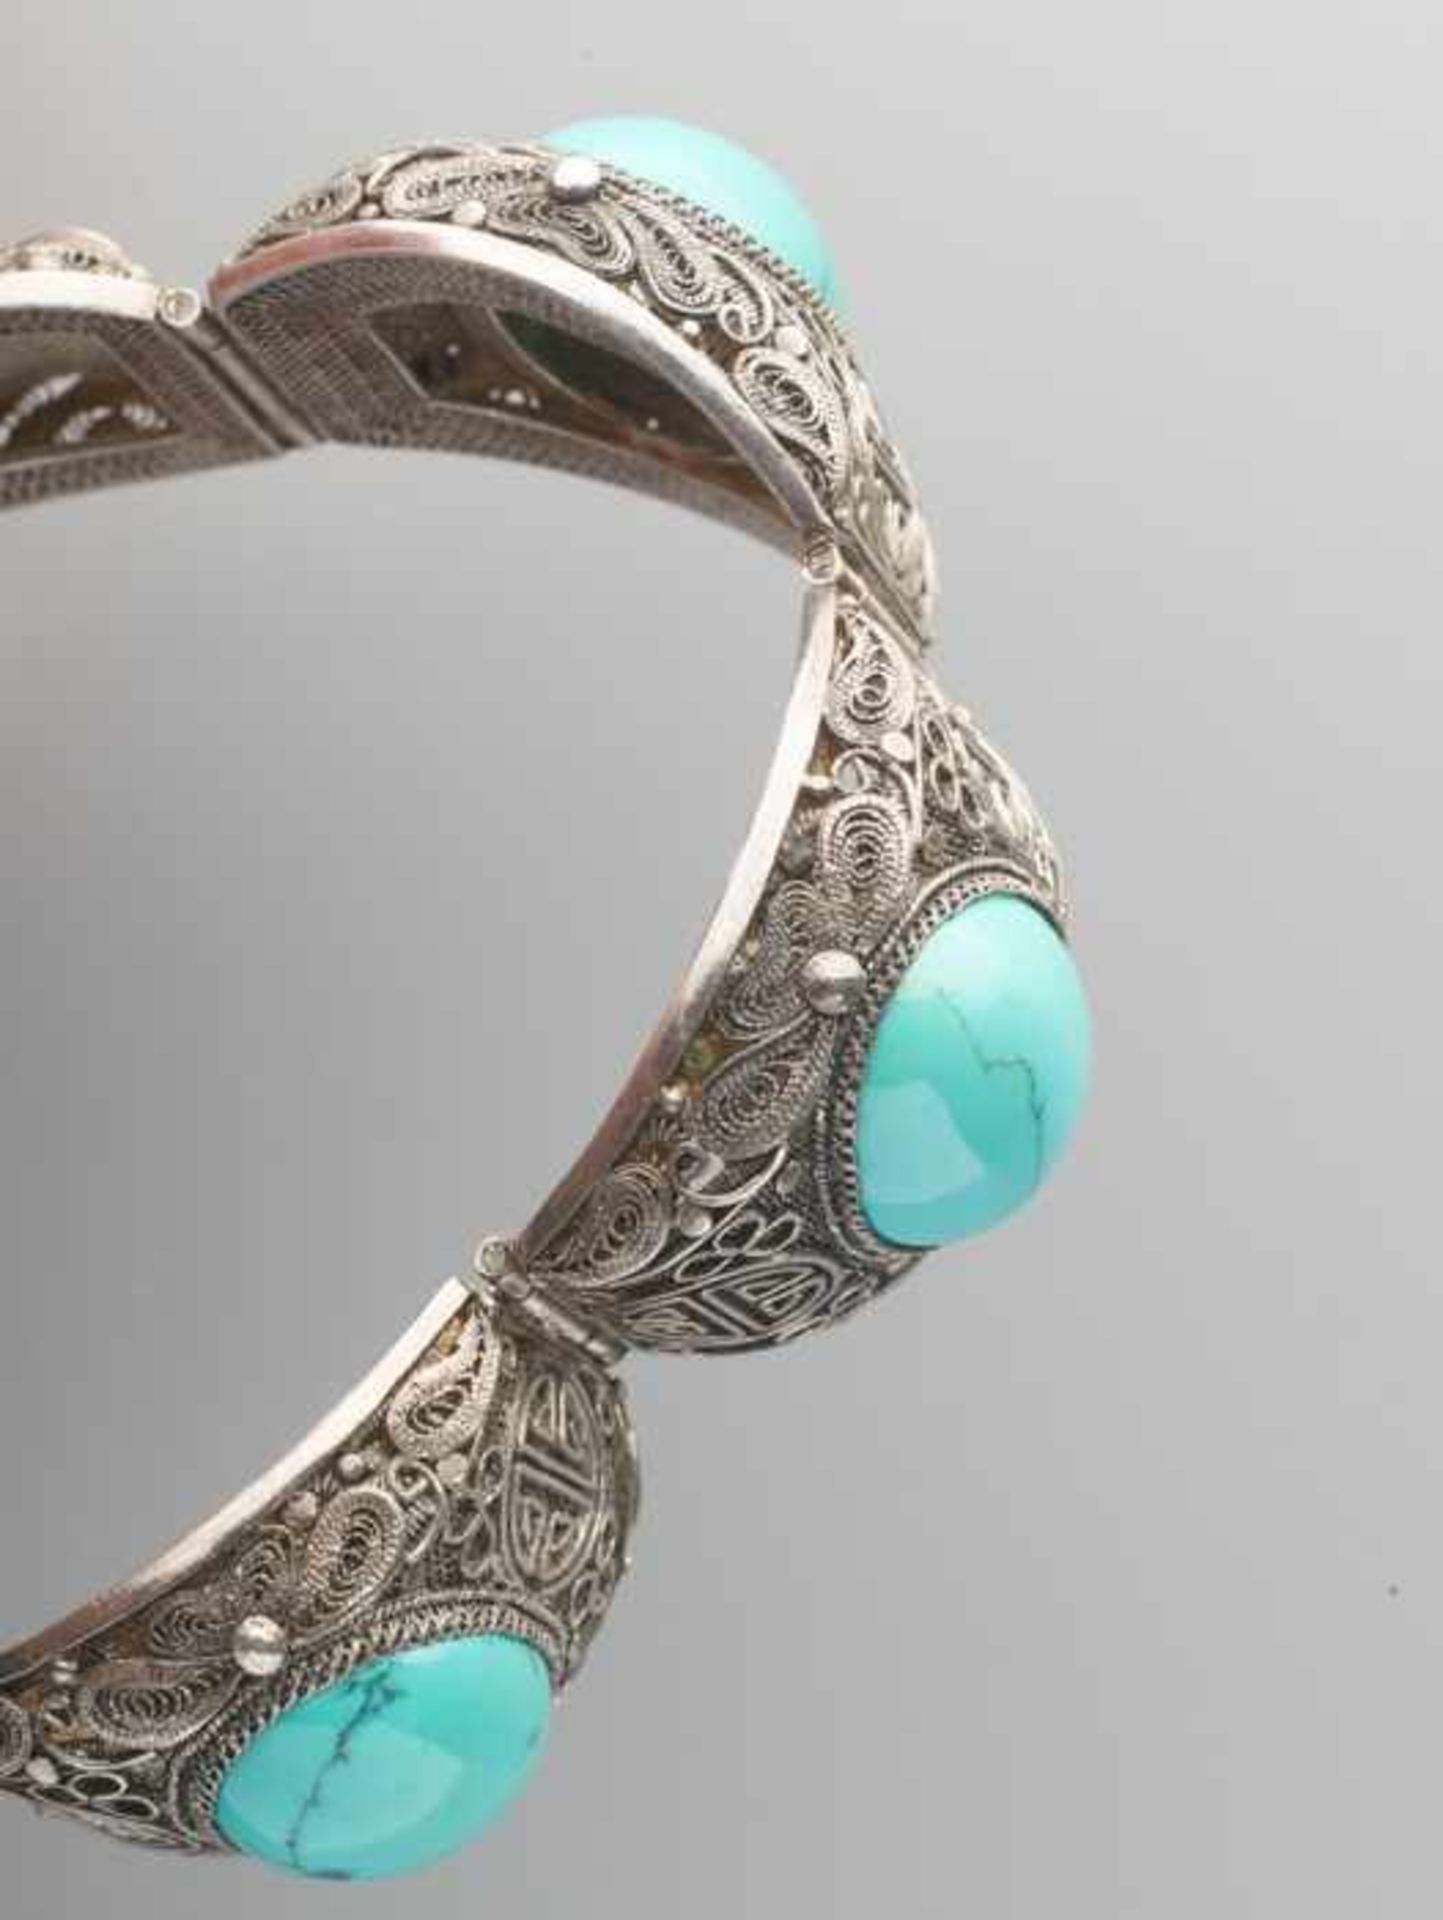 AN EXPORT SILVER BRACELET WITH 4 LARGE TURQUOISE CABOCHONS, QING DYNASTY Silver and turquoise, the - Image 5 of 6